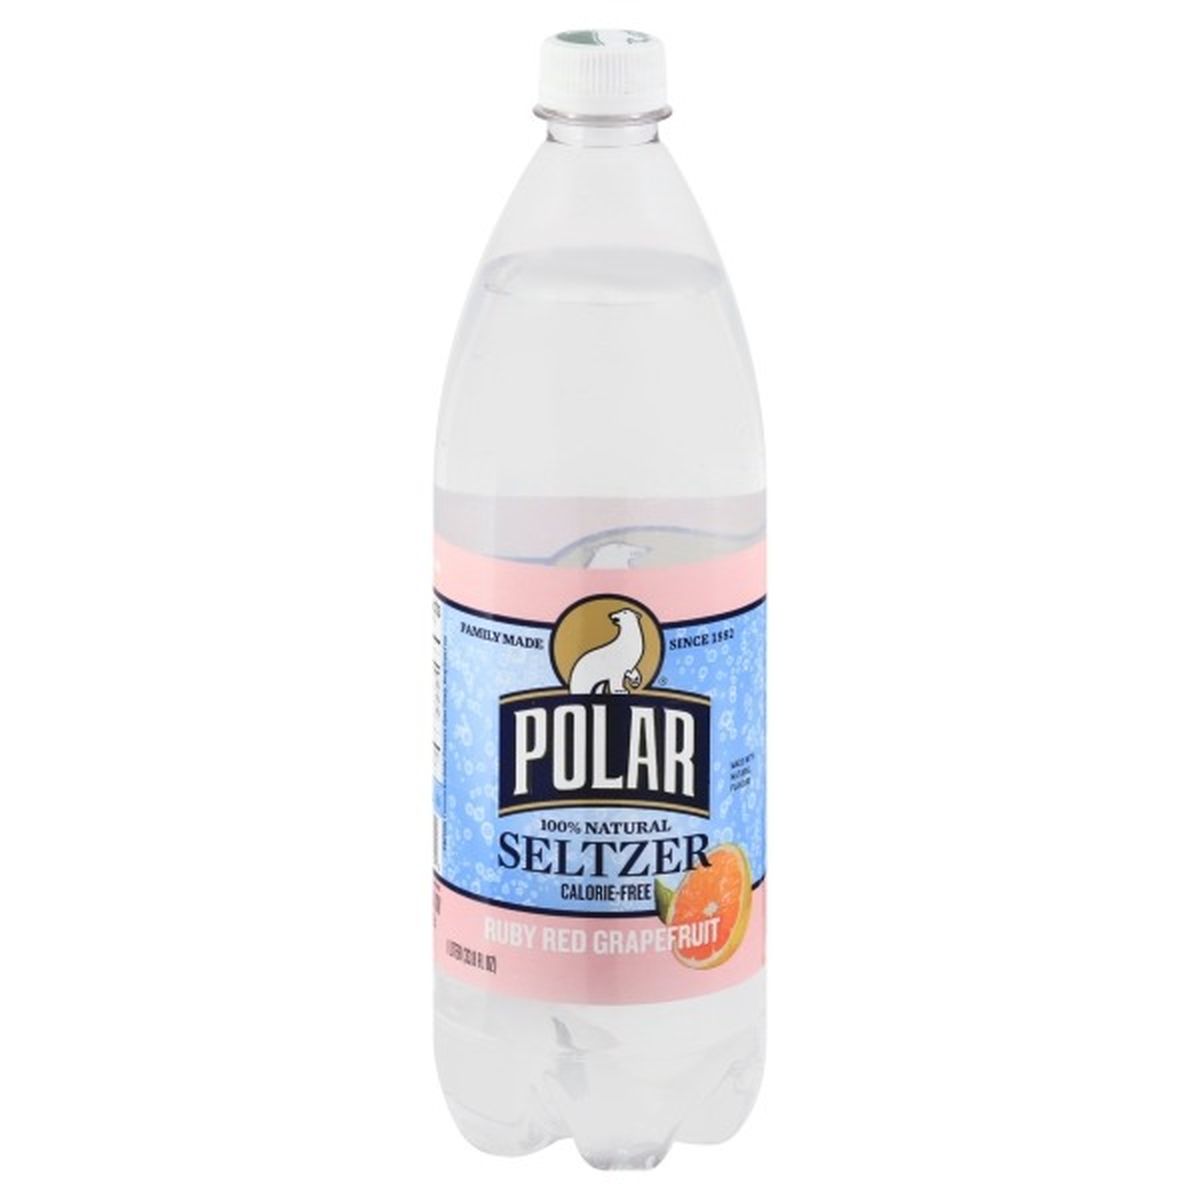 Calories in Polar Seltzer, 100% Natural, Ruby Red Grapefruit